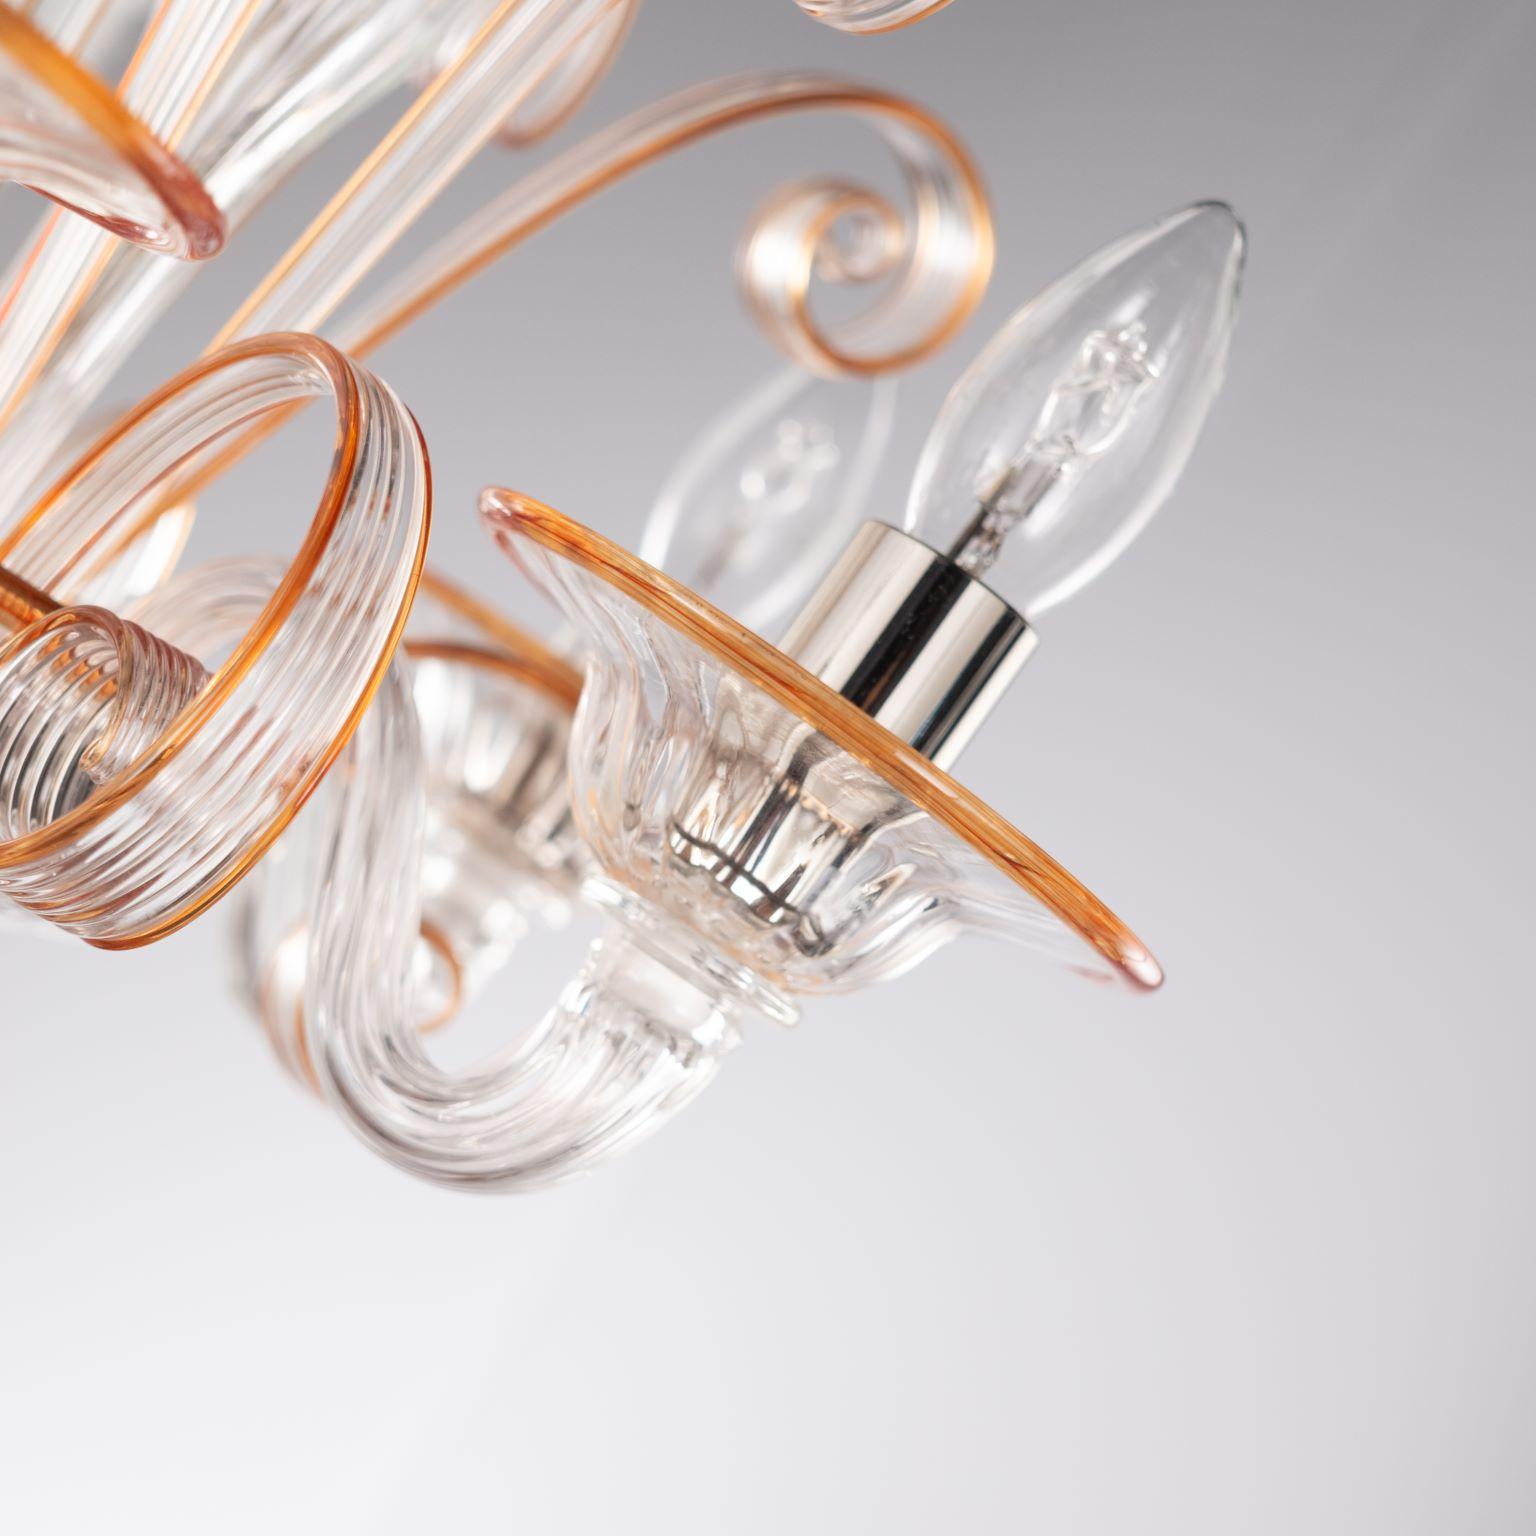 Capriccio chandelier, 5 lights, in clear artistic glass, with curly ornamental elements and orange details by Multiforme.
Inspired by the Classic Venetian tradition it is characterised by a central column where many blown glass “pastoral” elements